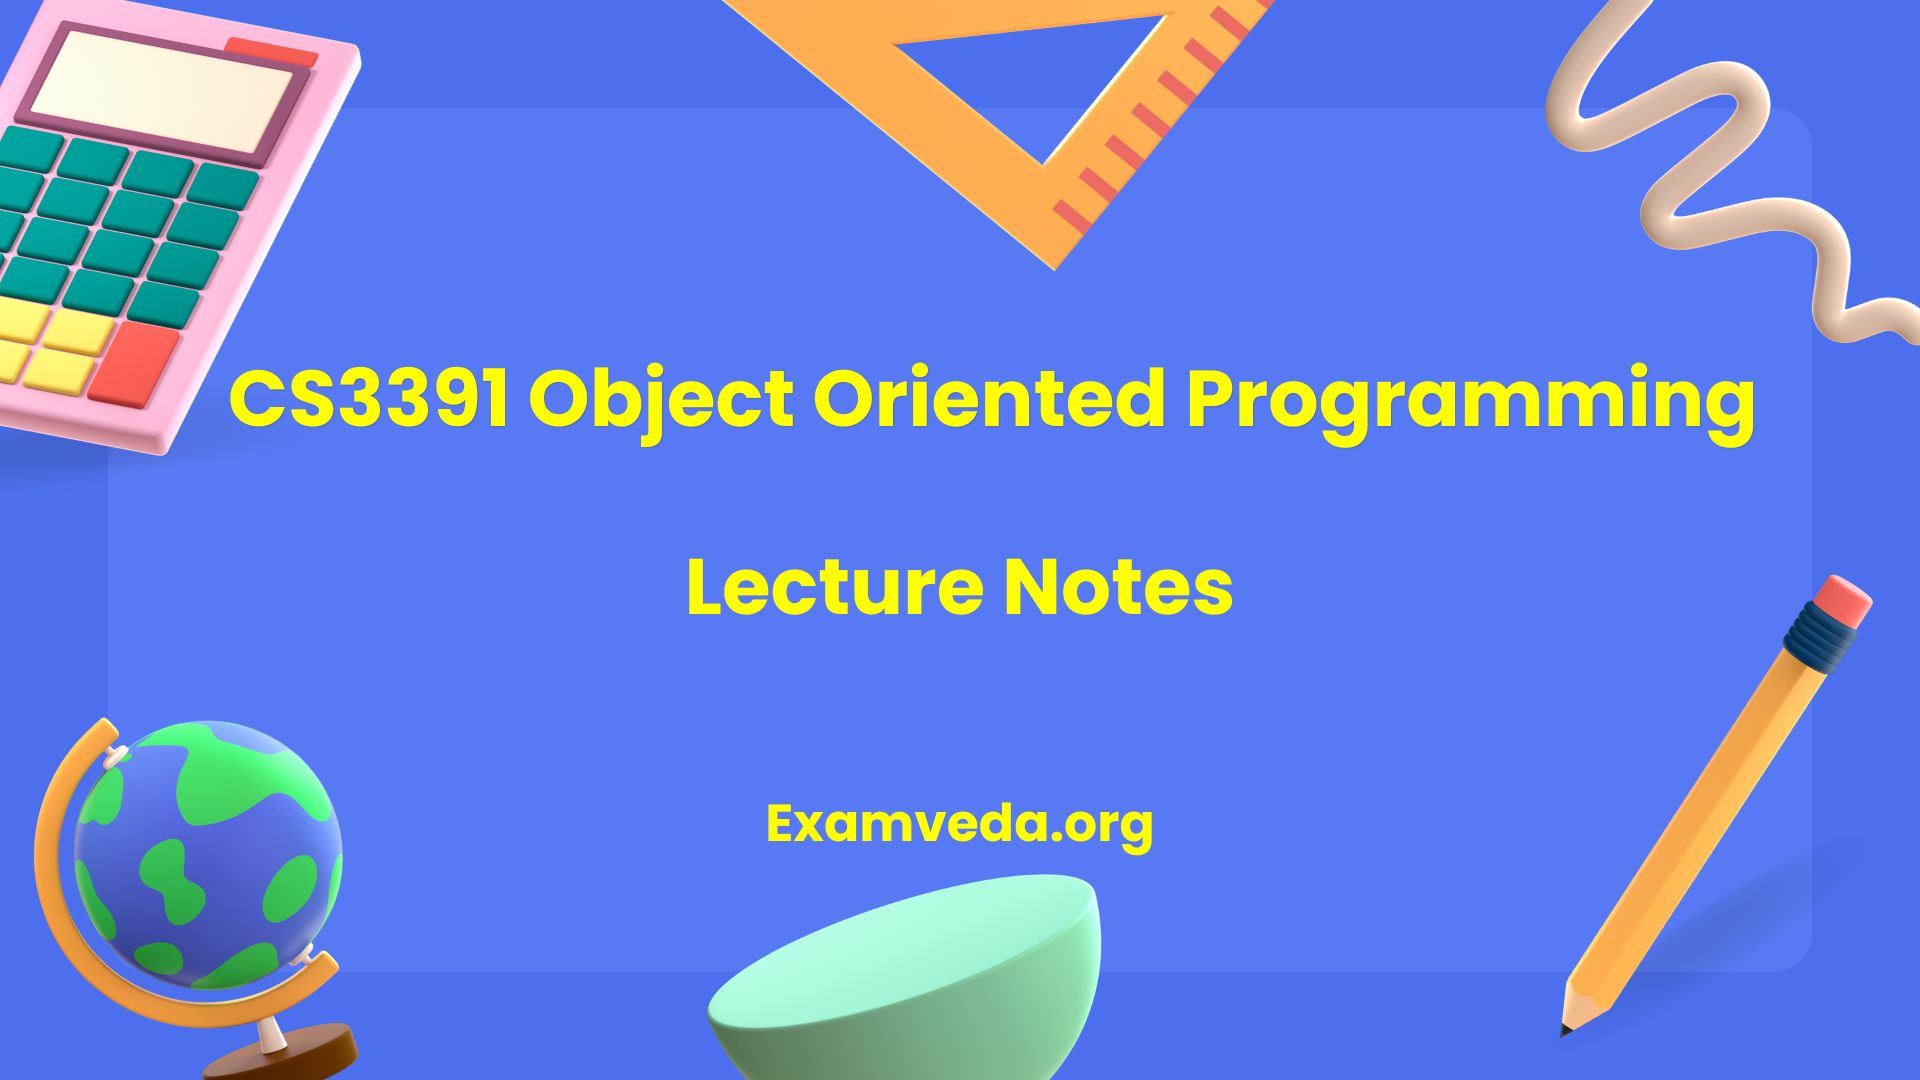 CS3391 Object Oriented Programming Lecture Notes